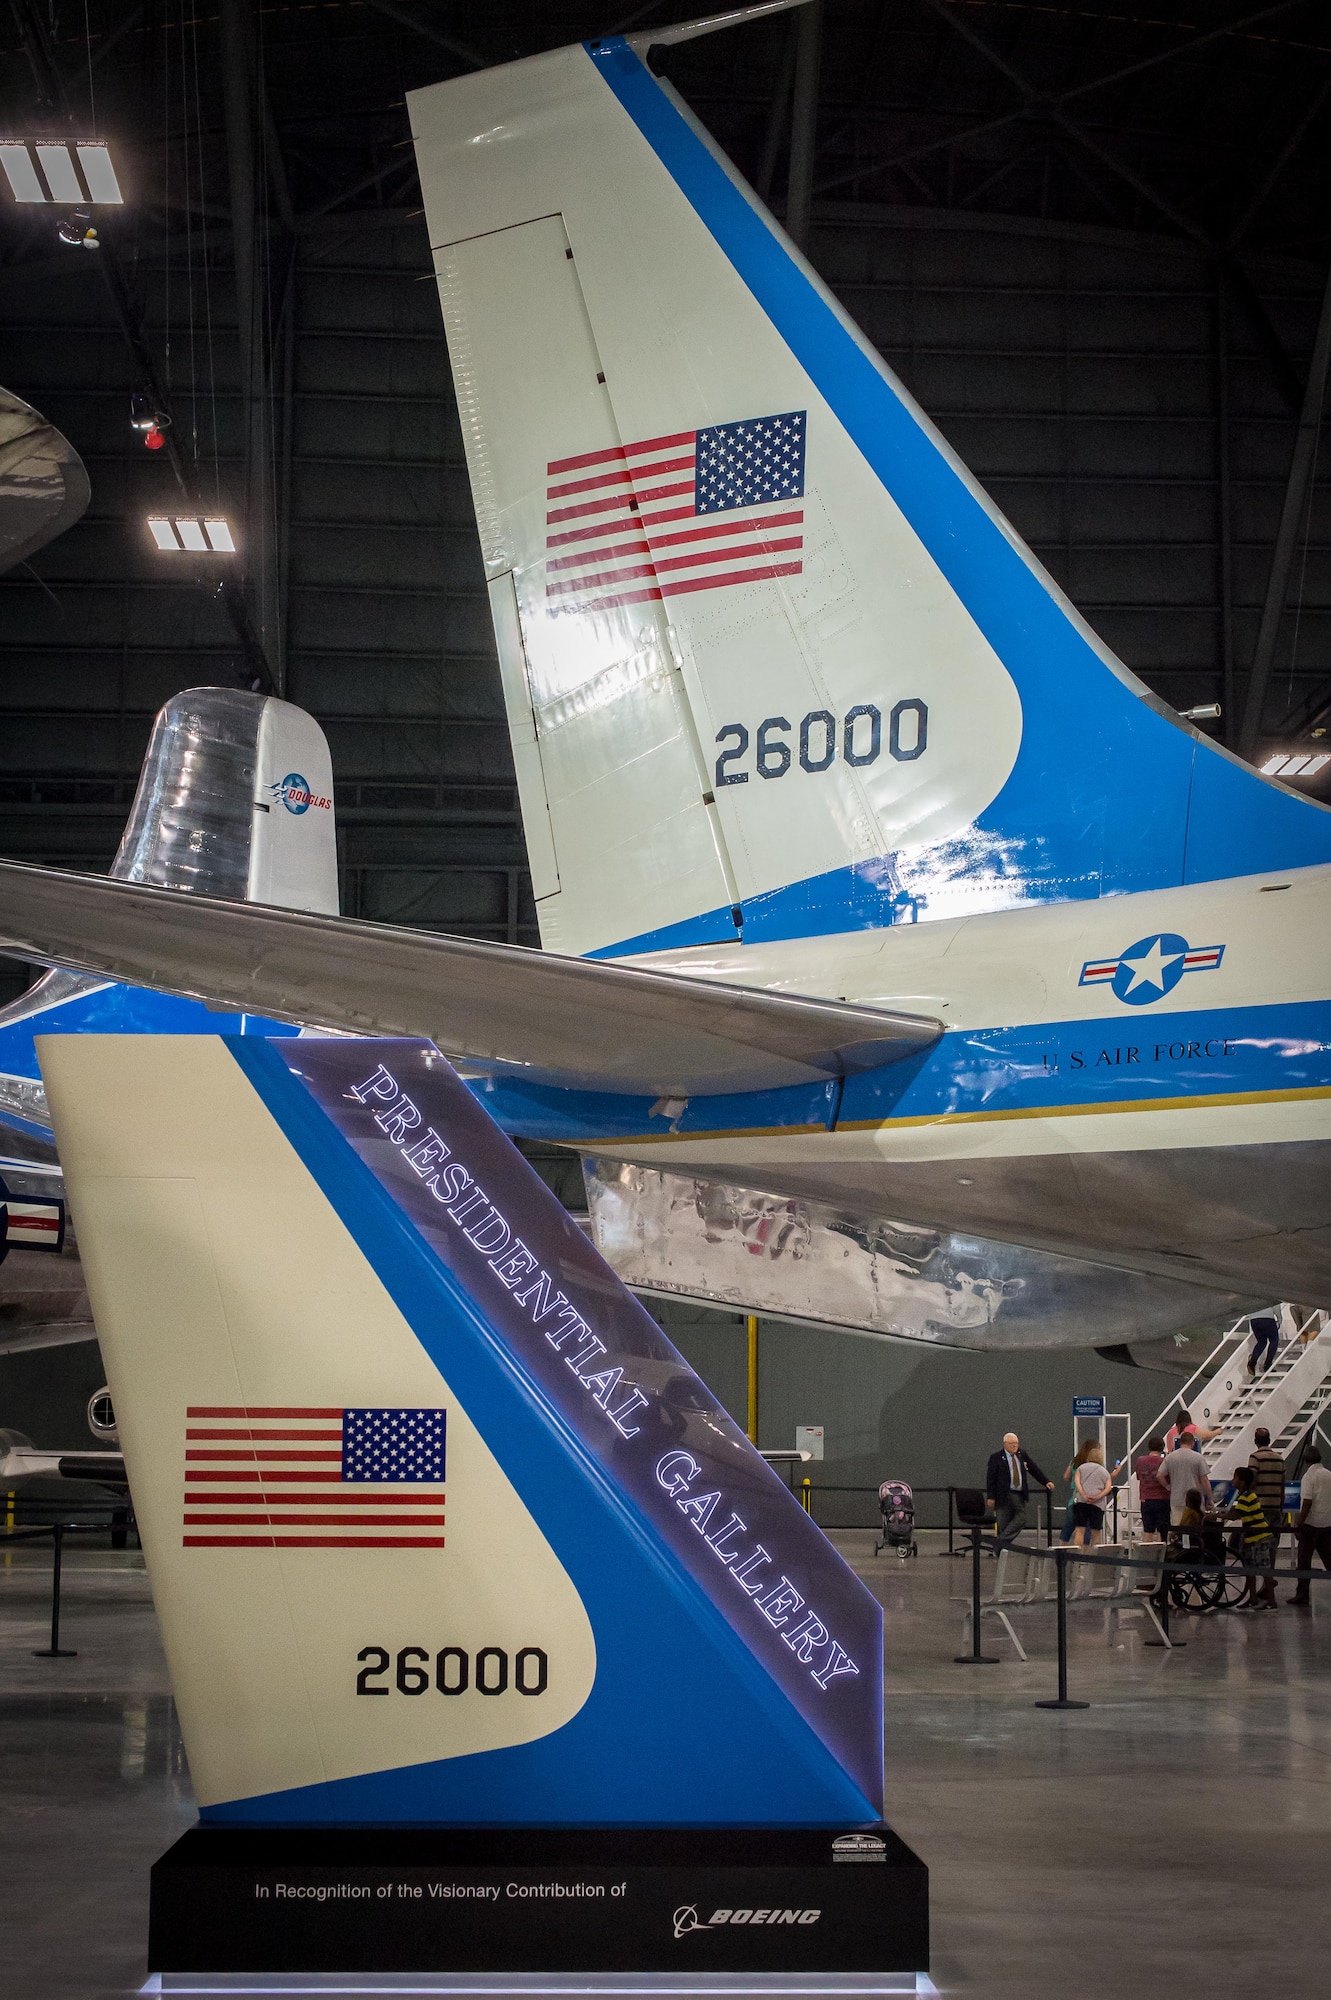 DAYTON, Ohio -- The Boeing VC-137C SAM 26000 on display in the Presidential Gallery at the National Museum of the United States Air Force. (U.S. Air Force photo by Jim Copes)